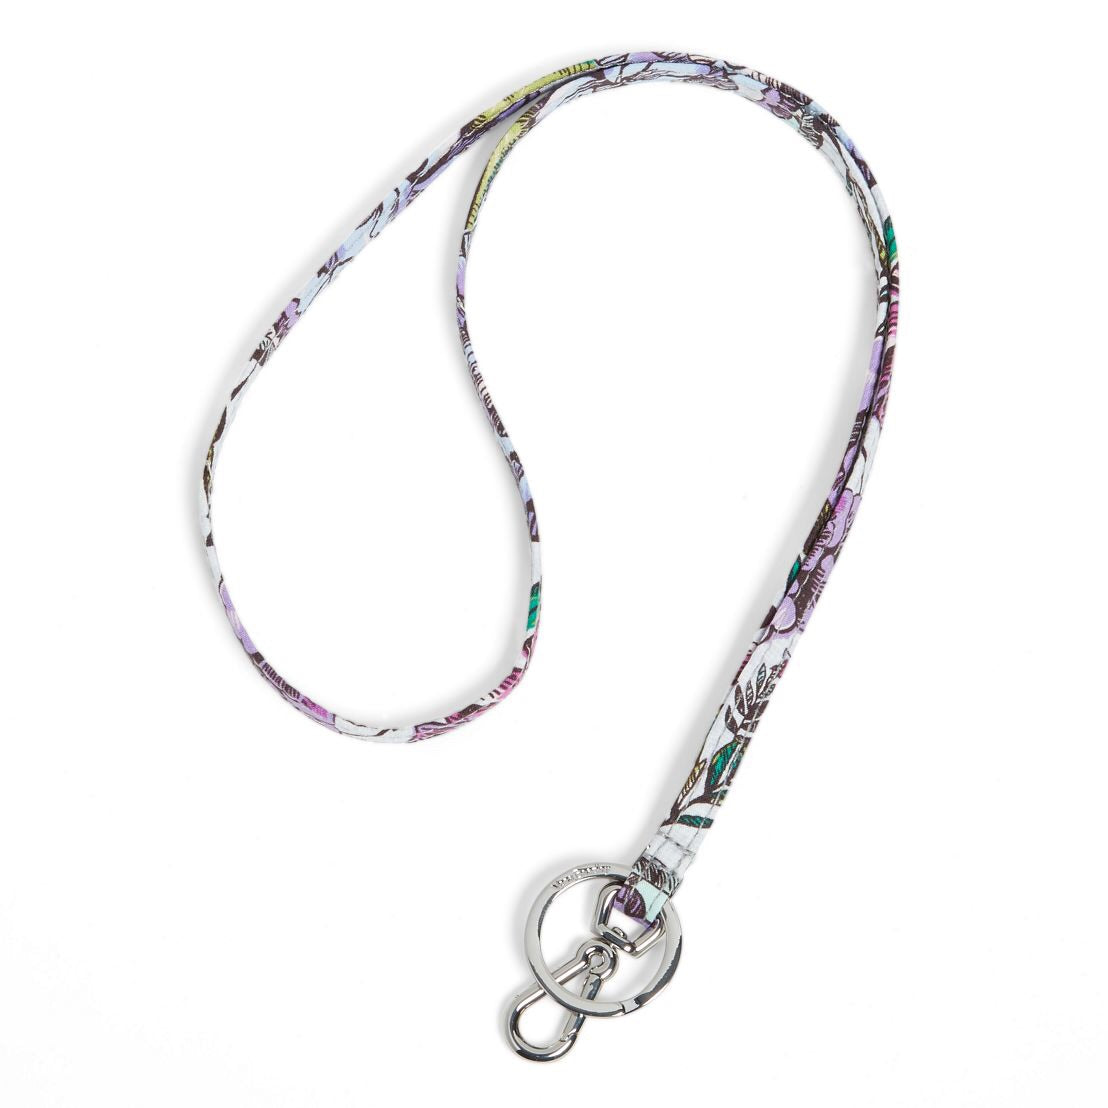 Iconic Lanyard - Lavender Meadow